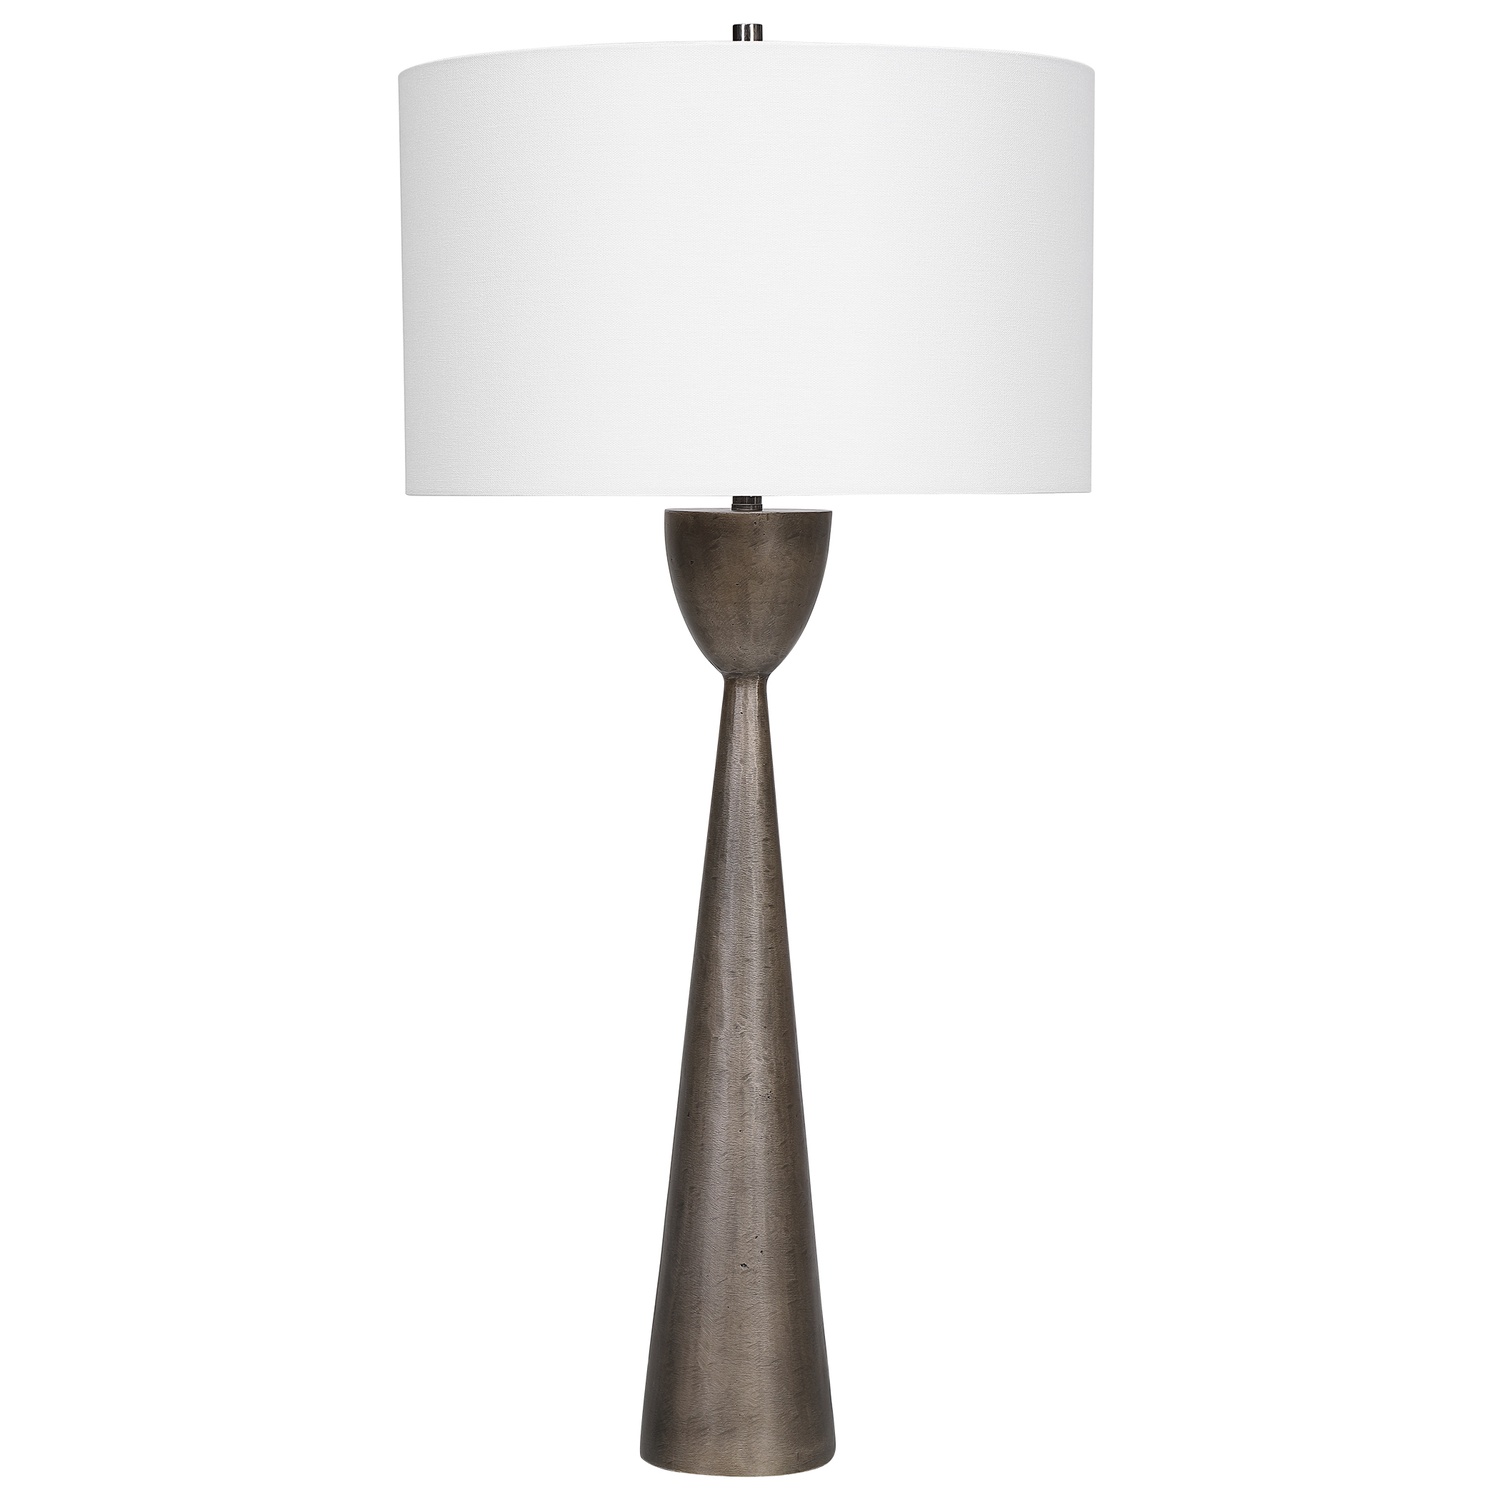 Waller-Handcrafted Cast Table Lamp